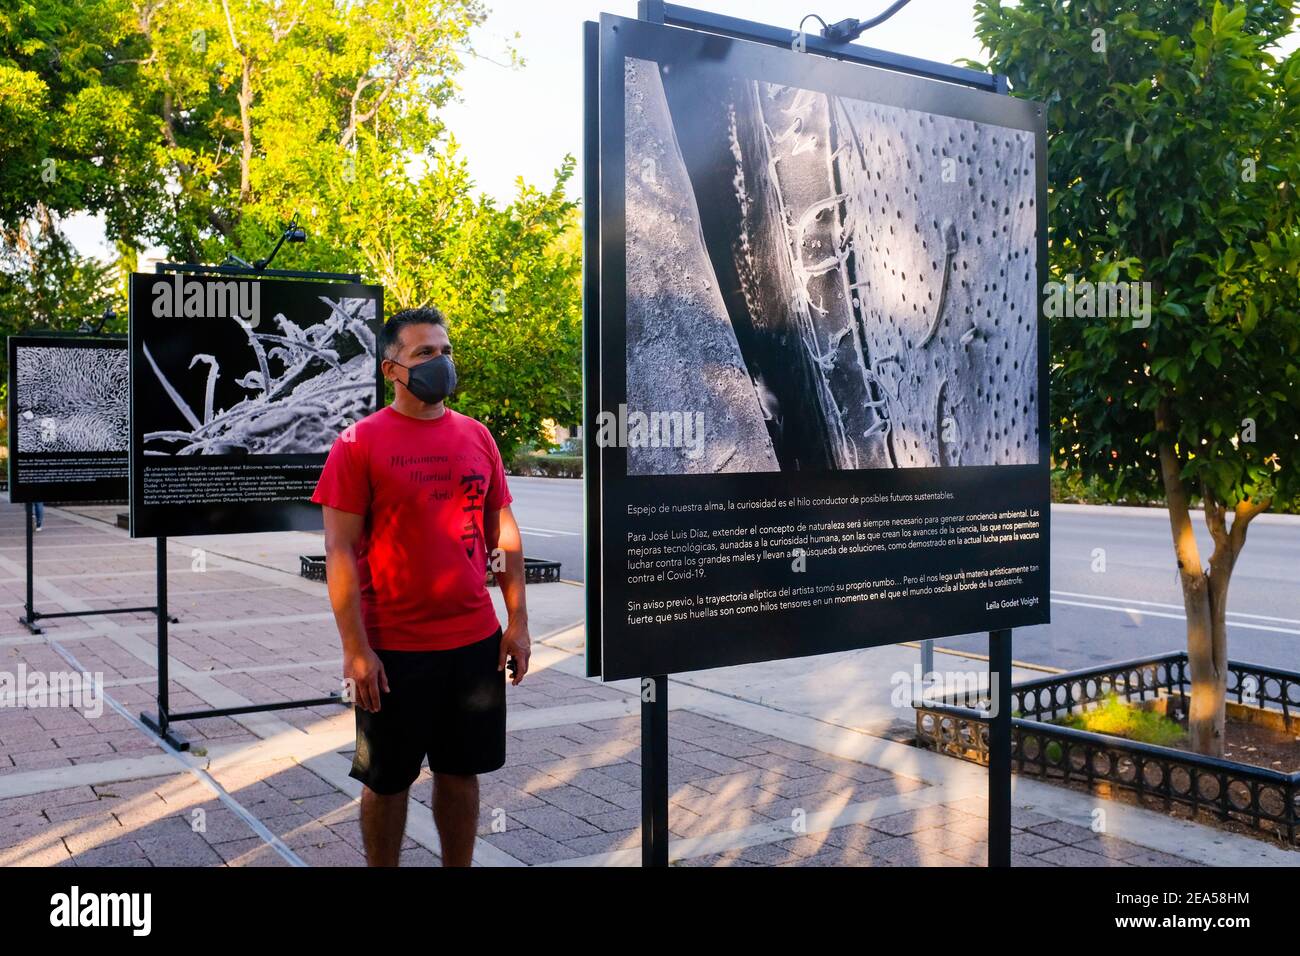 Visitor looking at photo exhibition on Paseo Montejo during the Covid-19 Pandemic, Merida Mexico Stock Photo